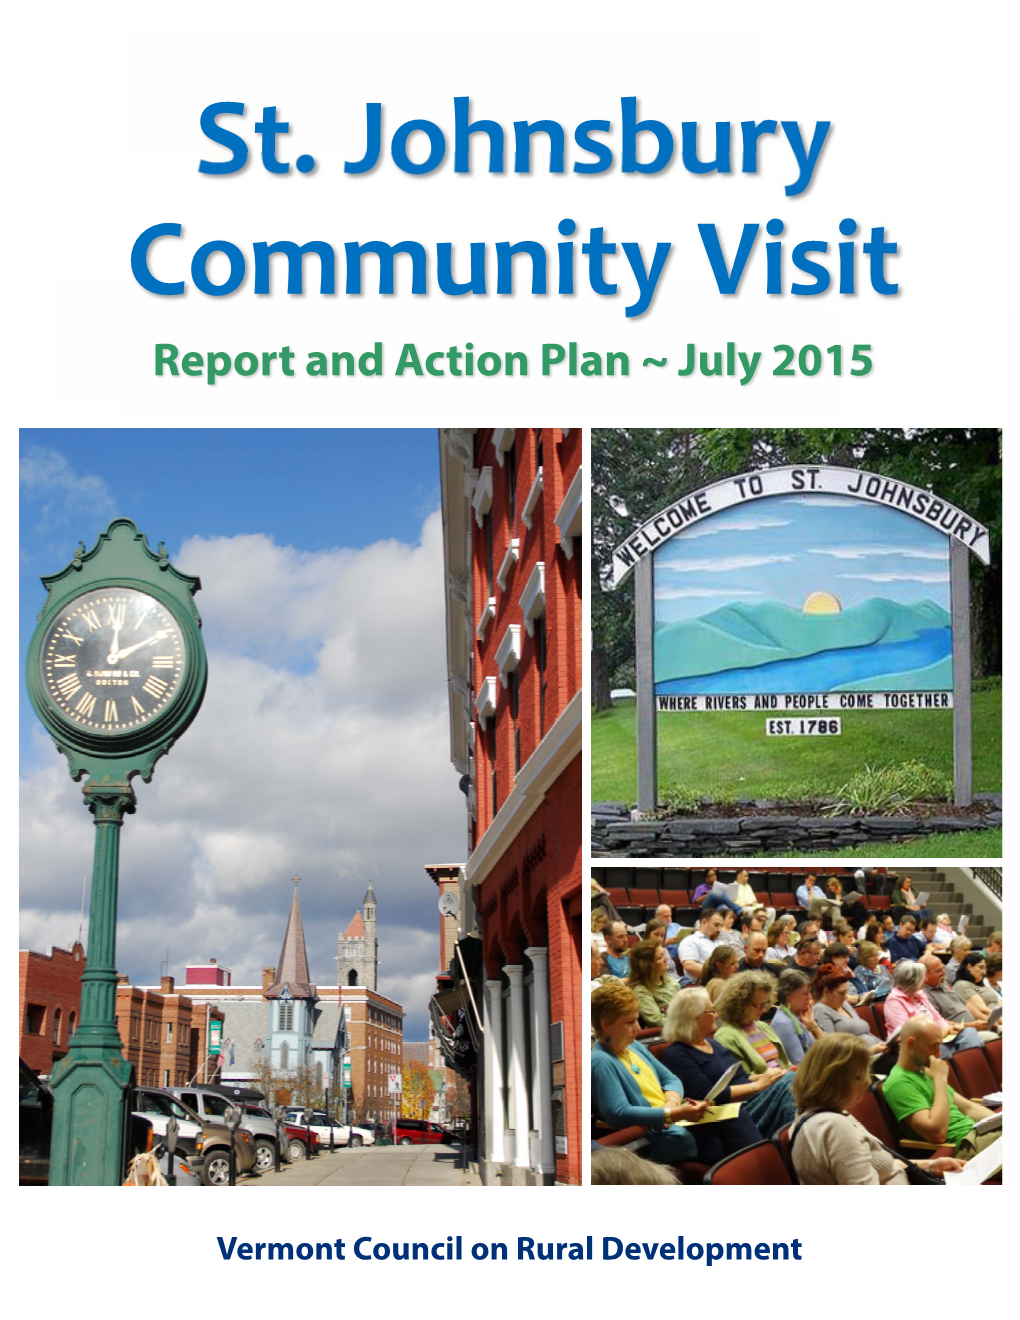 St. Johnsbury Community Visit Report and Action Plan ~ July 2015